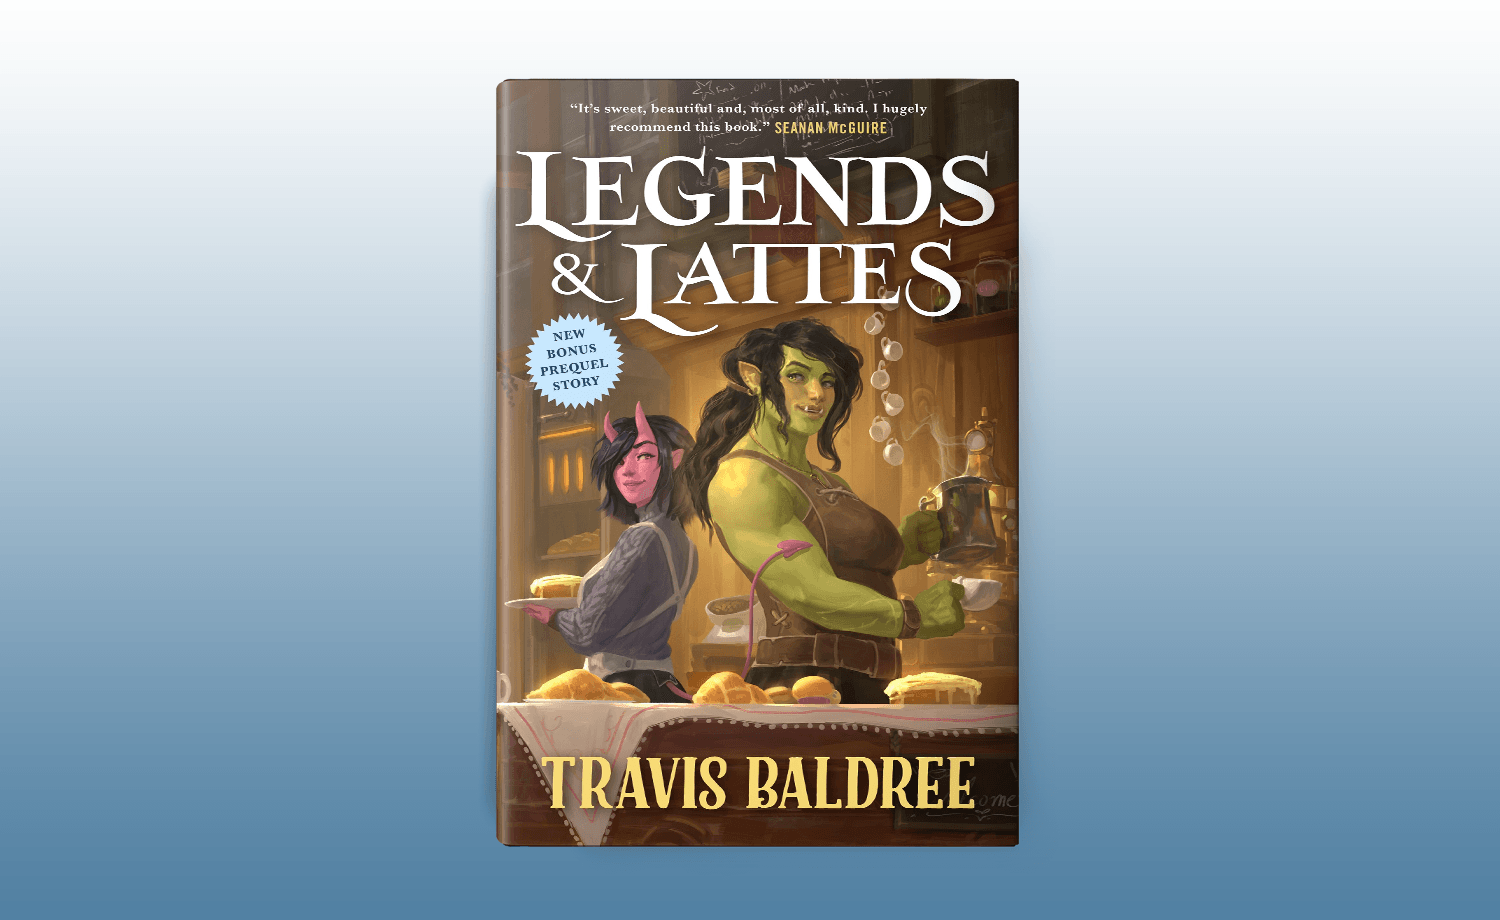 Legends & Lattes Would Be the Warmest, Coziest Fantasy Adaptation